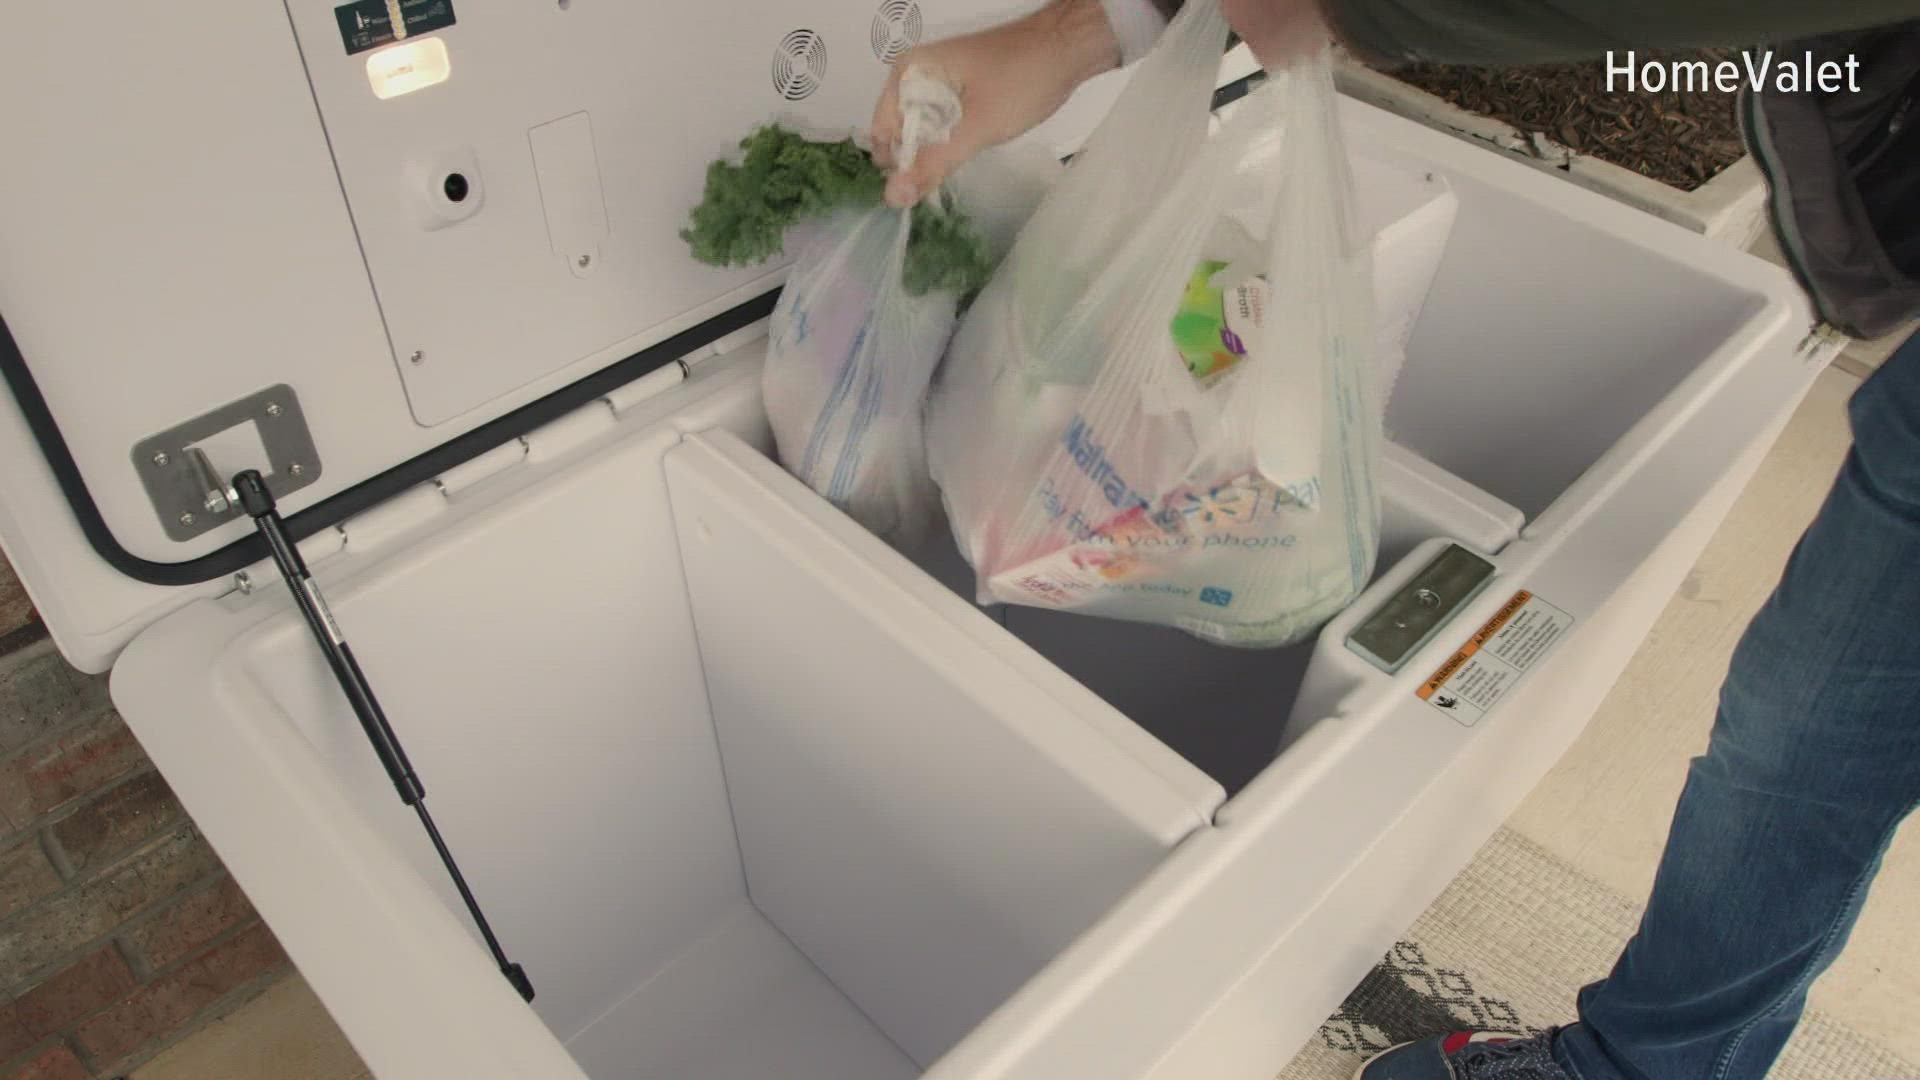 Company offers temperature-controlled and secure home delivery of groceries, packages, and medicine